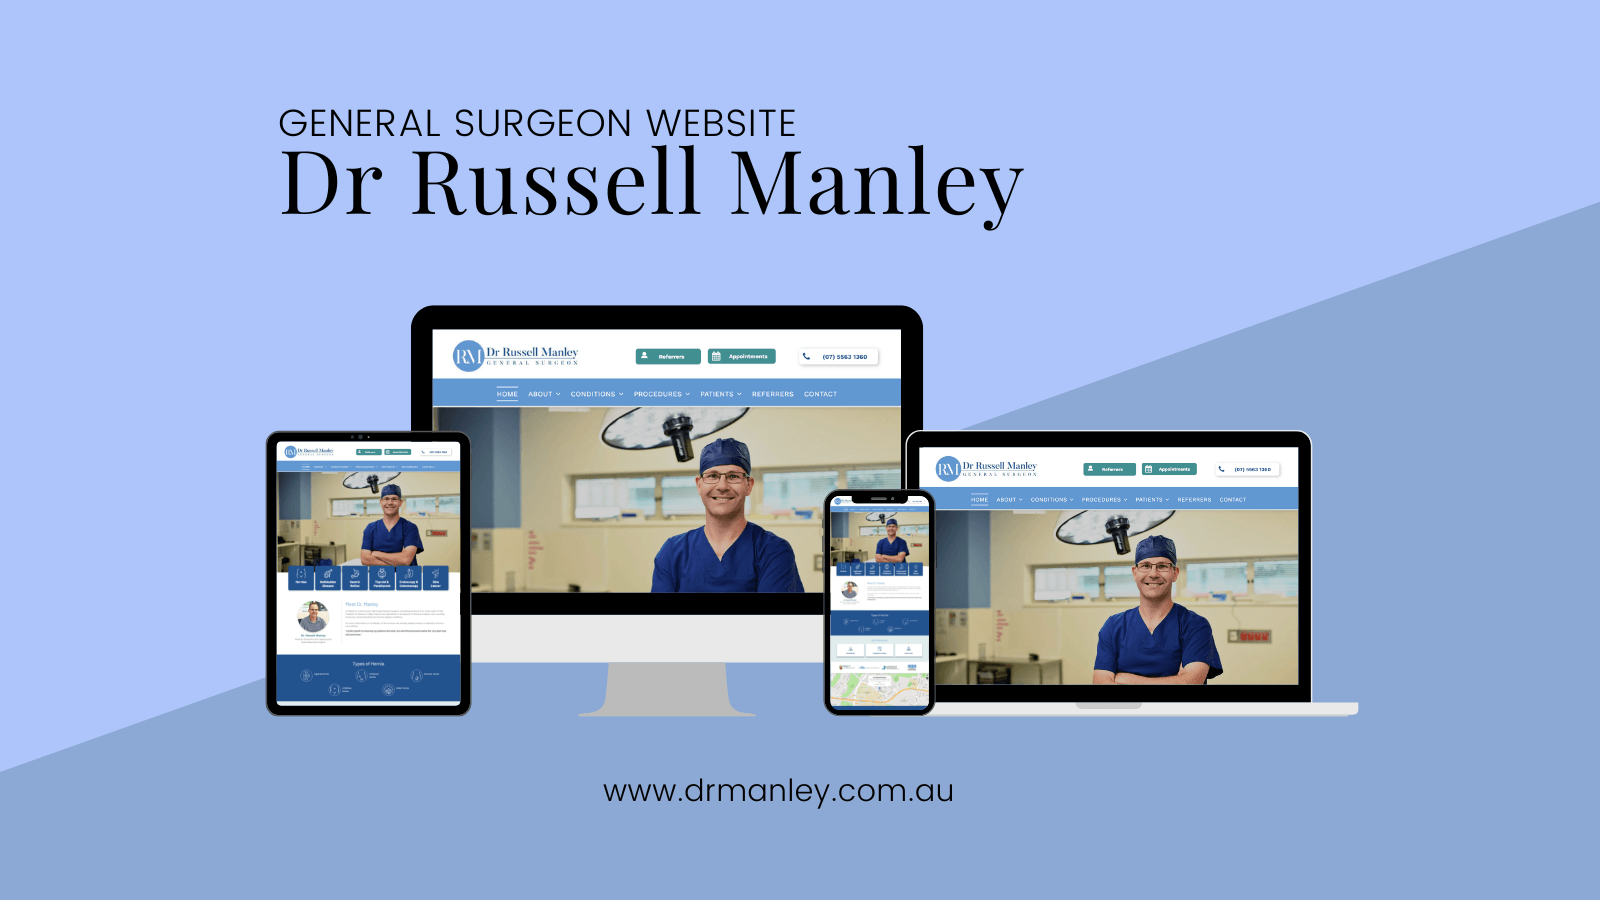 General Surgeon Website - Dr Russell Manley